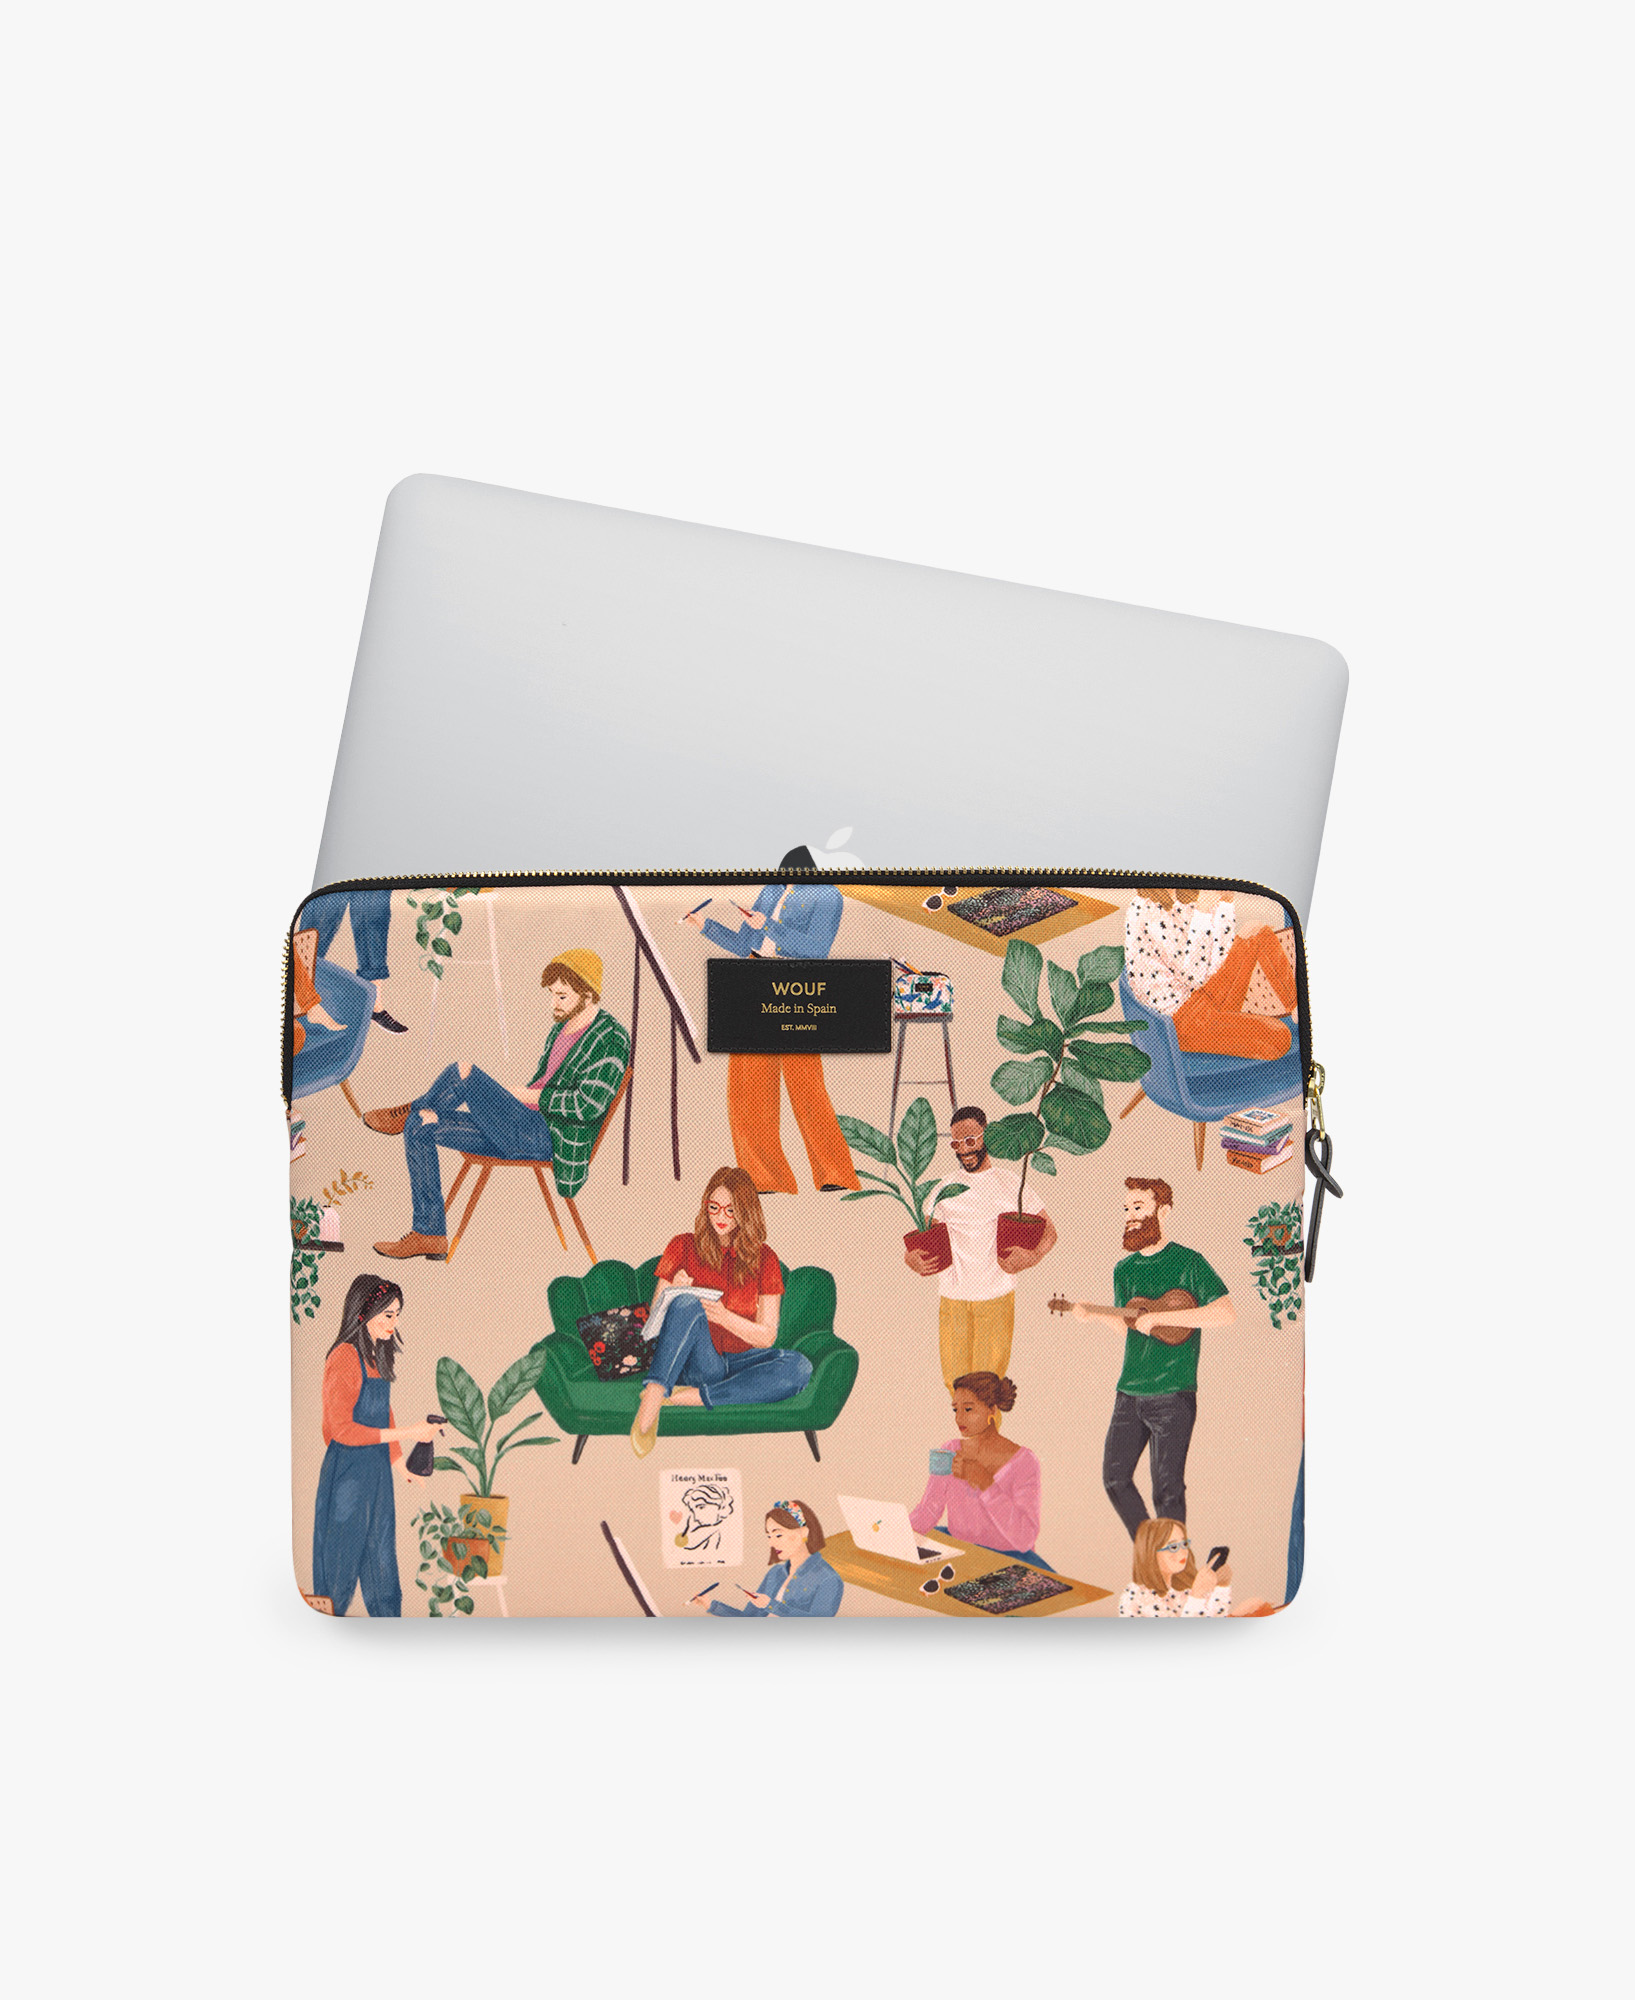 WOUF-13-Laptop-Sleeve-Cozy-Usage